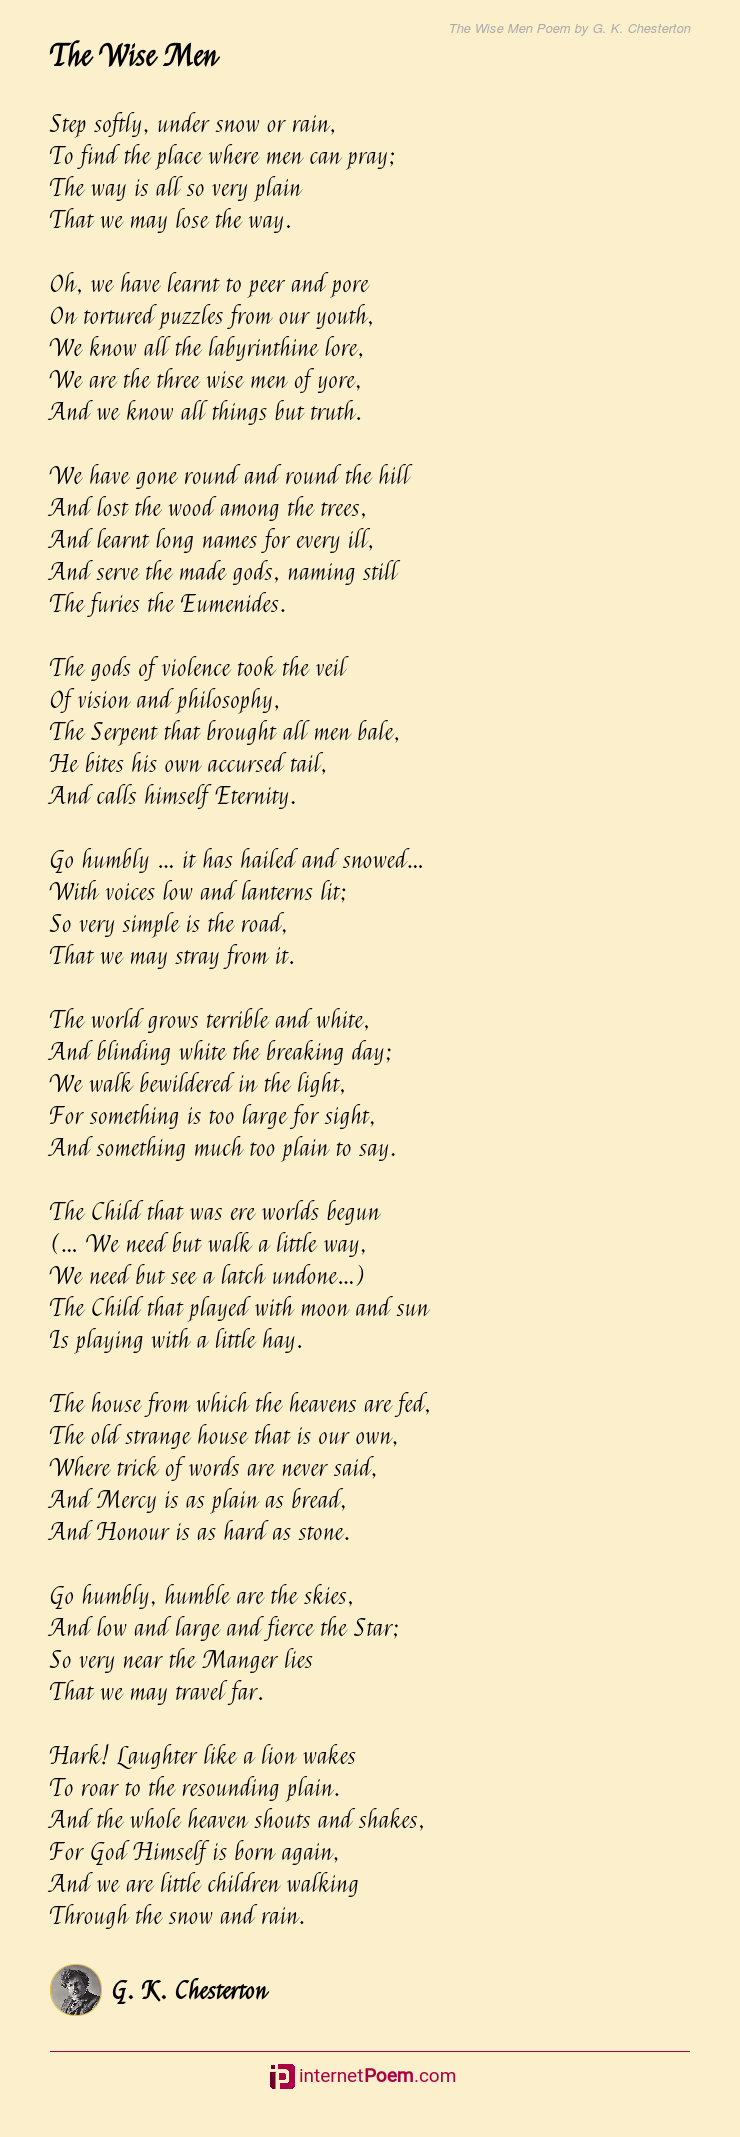 The Wise Men Poem by G. K. Chesterton